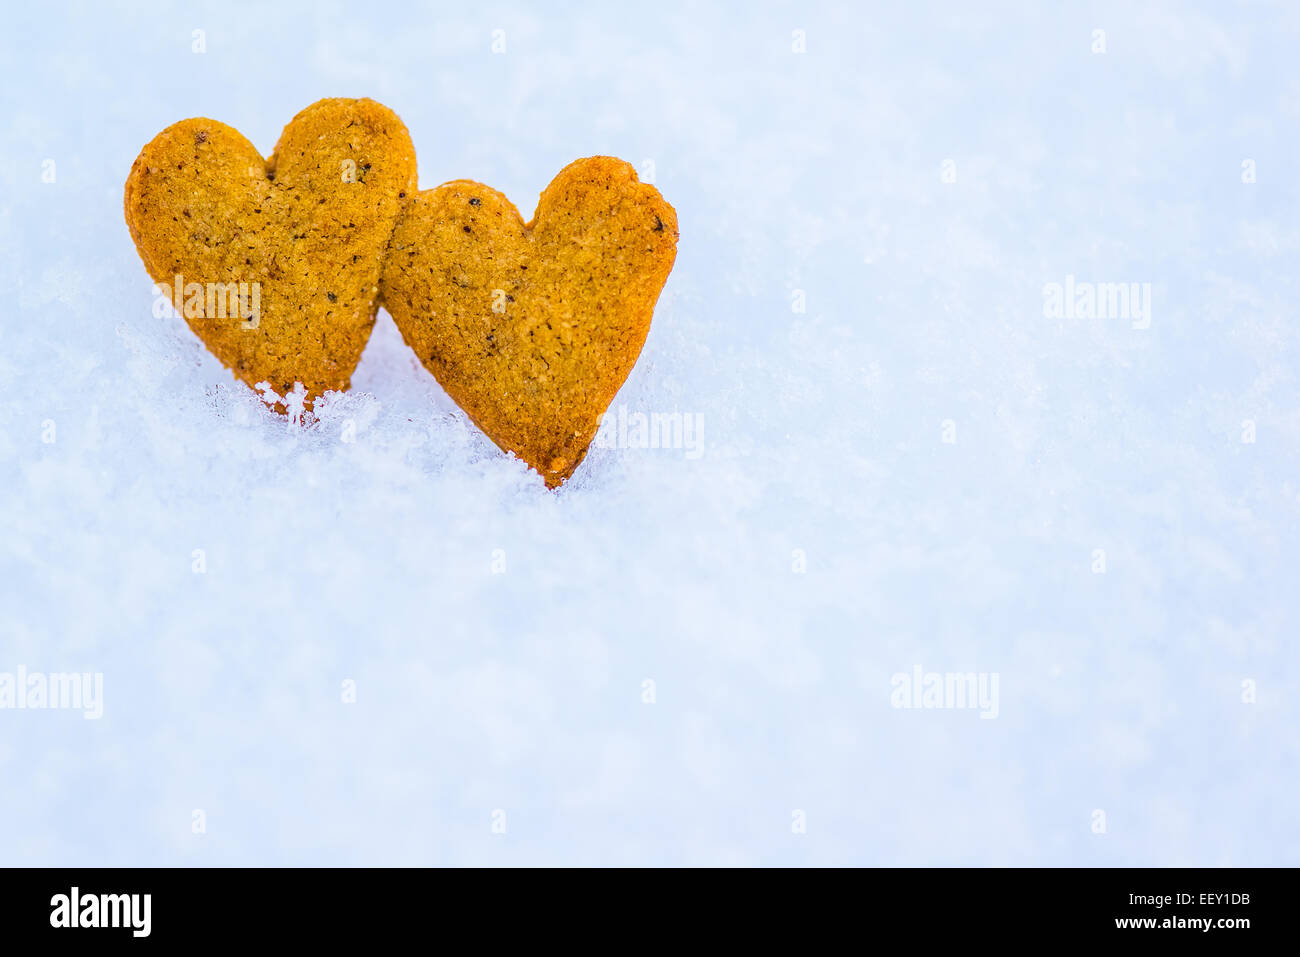 Gingerbread hearts on snow Stock Photo